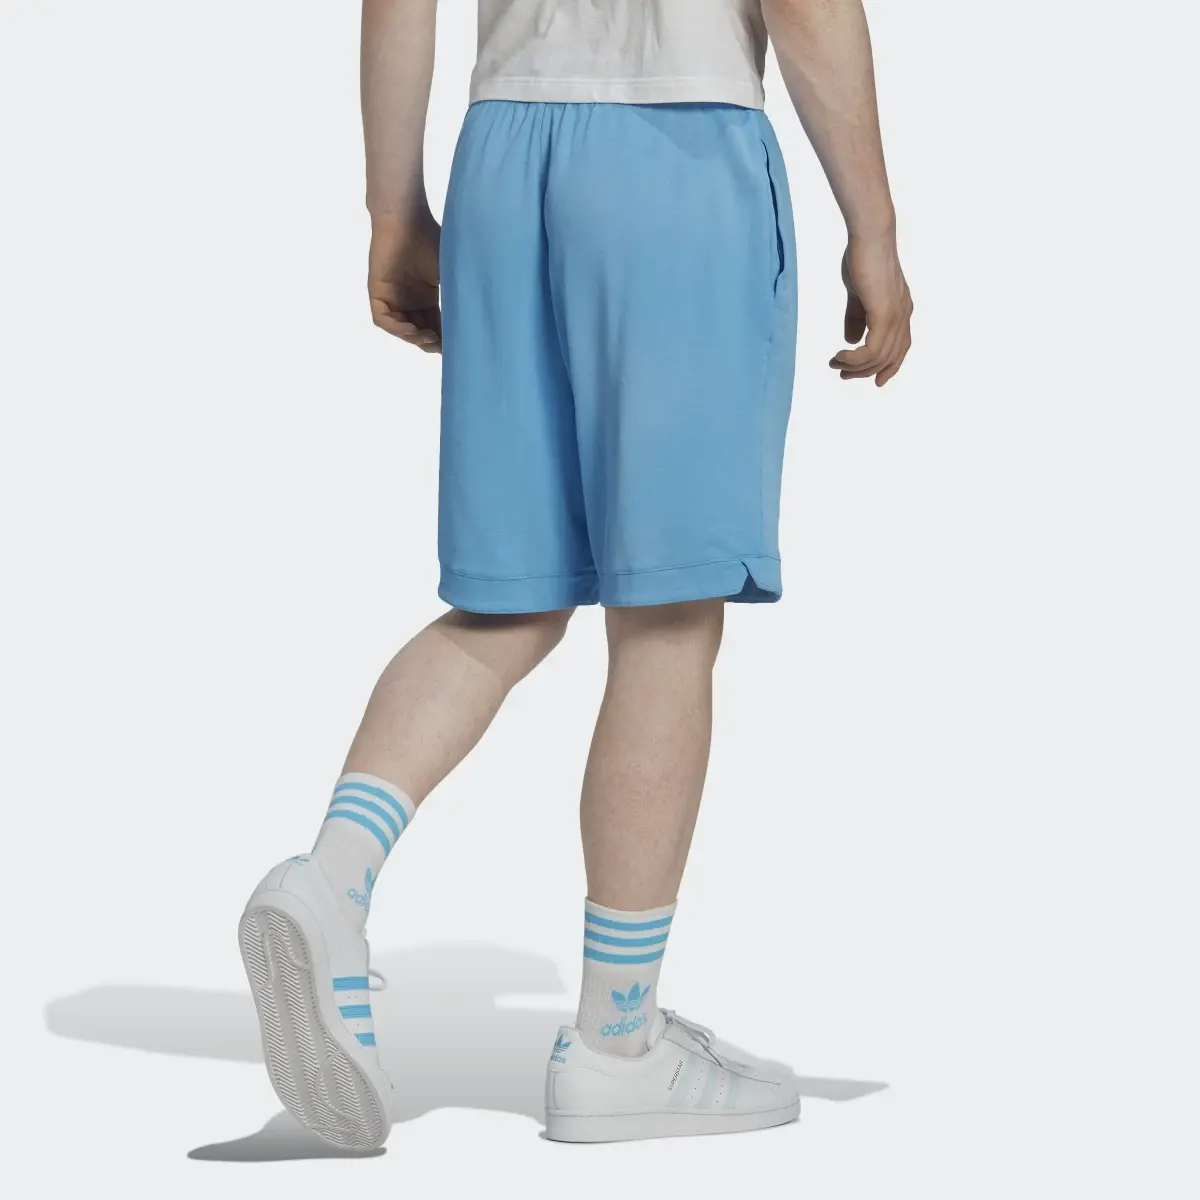 Adidas Essentials+ Made with Nature Shorts. 2